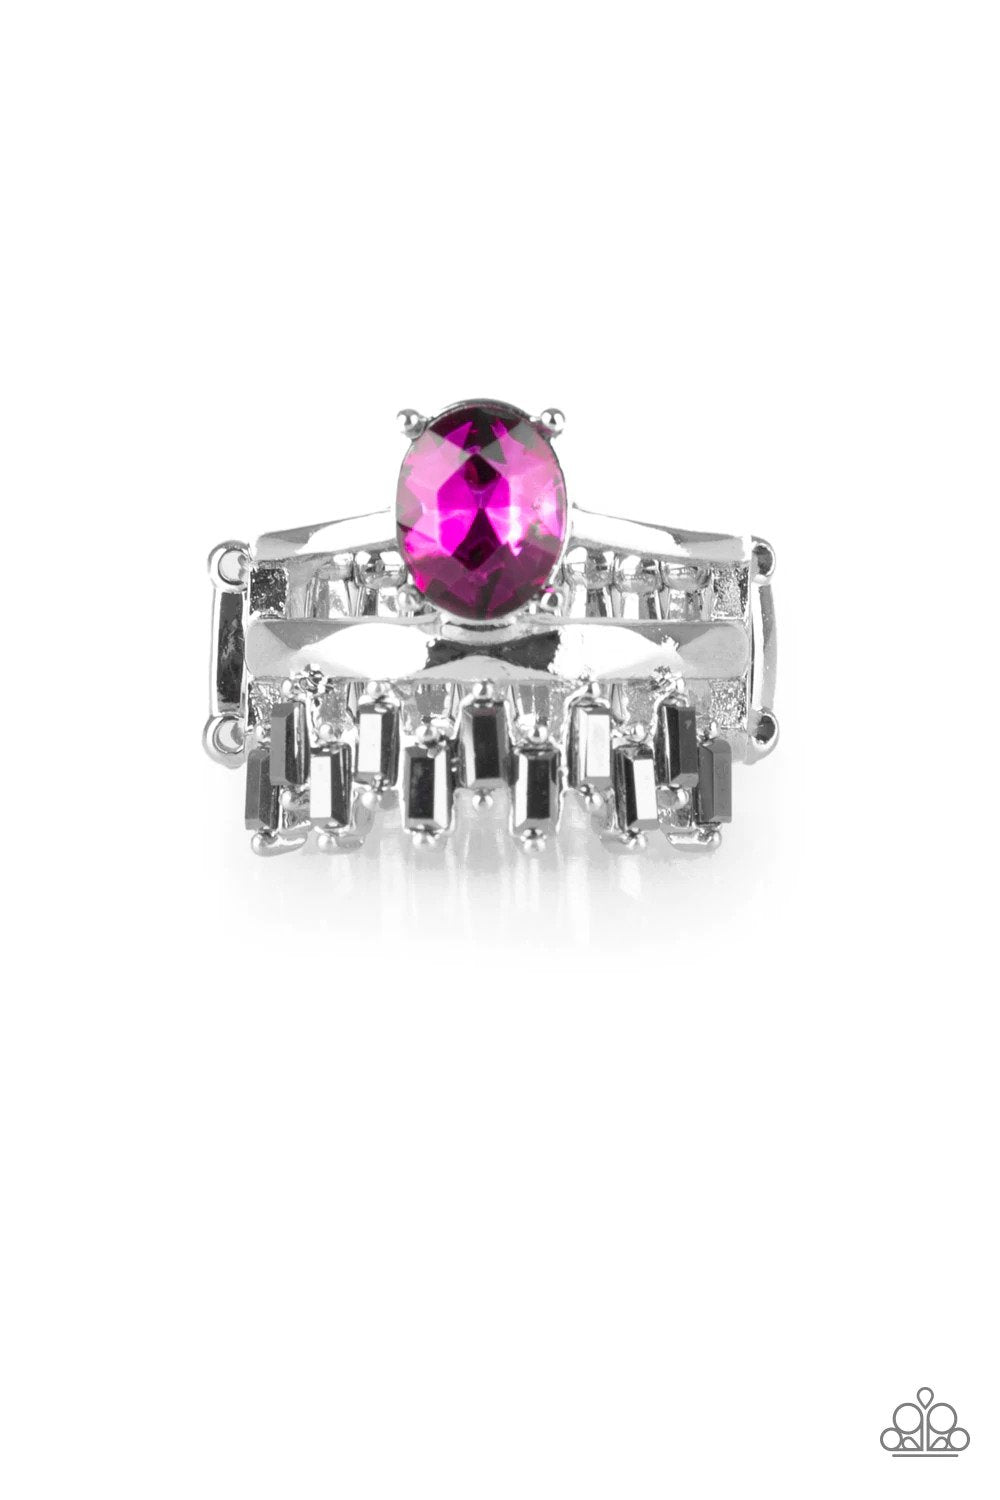 Crowned Victor Pink Ring - Paparazzi Accessories- lightbox - CarasShop.com - $5 Jewelry by Cara Jewels